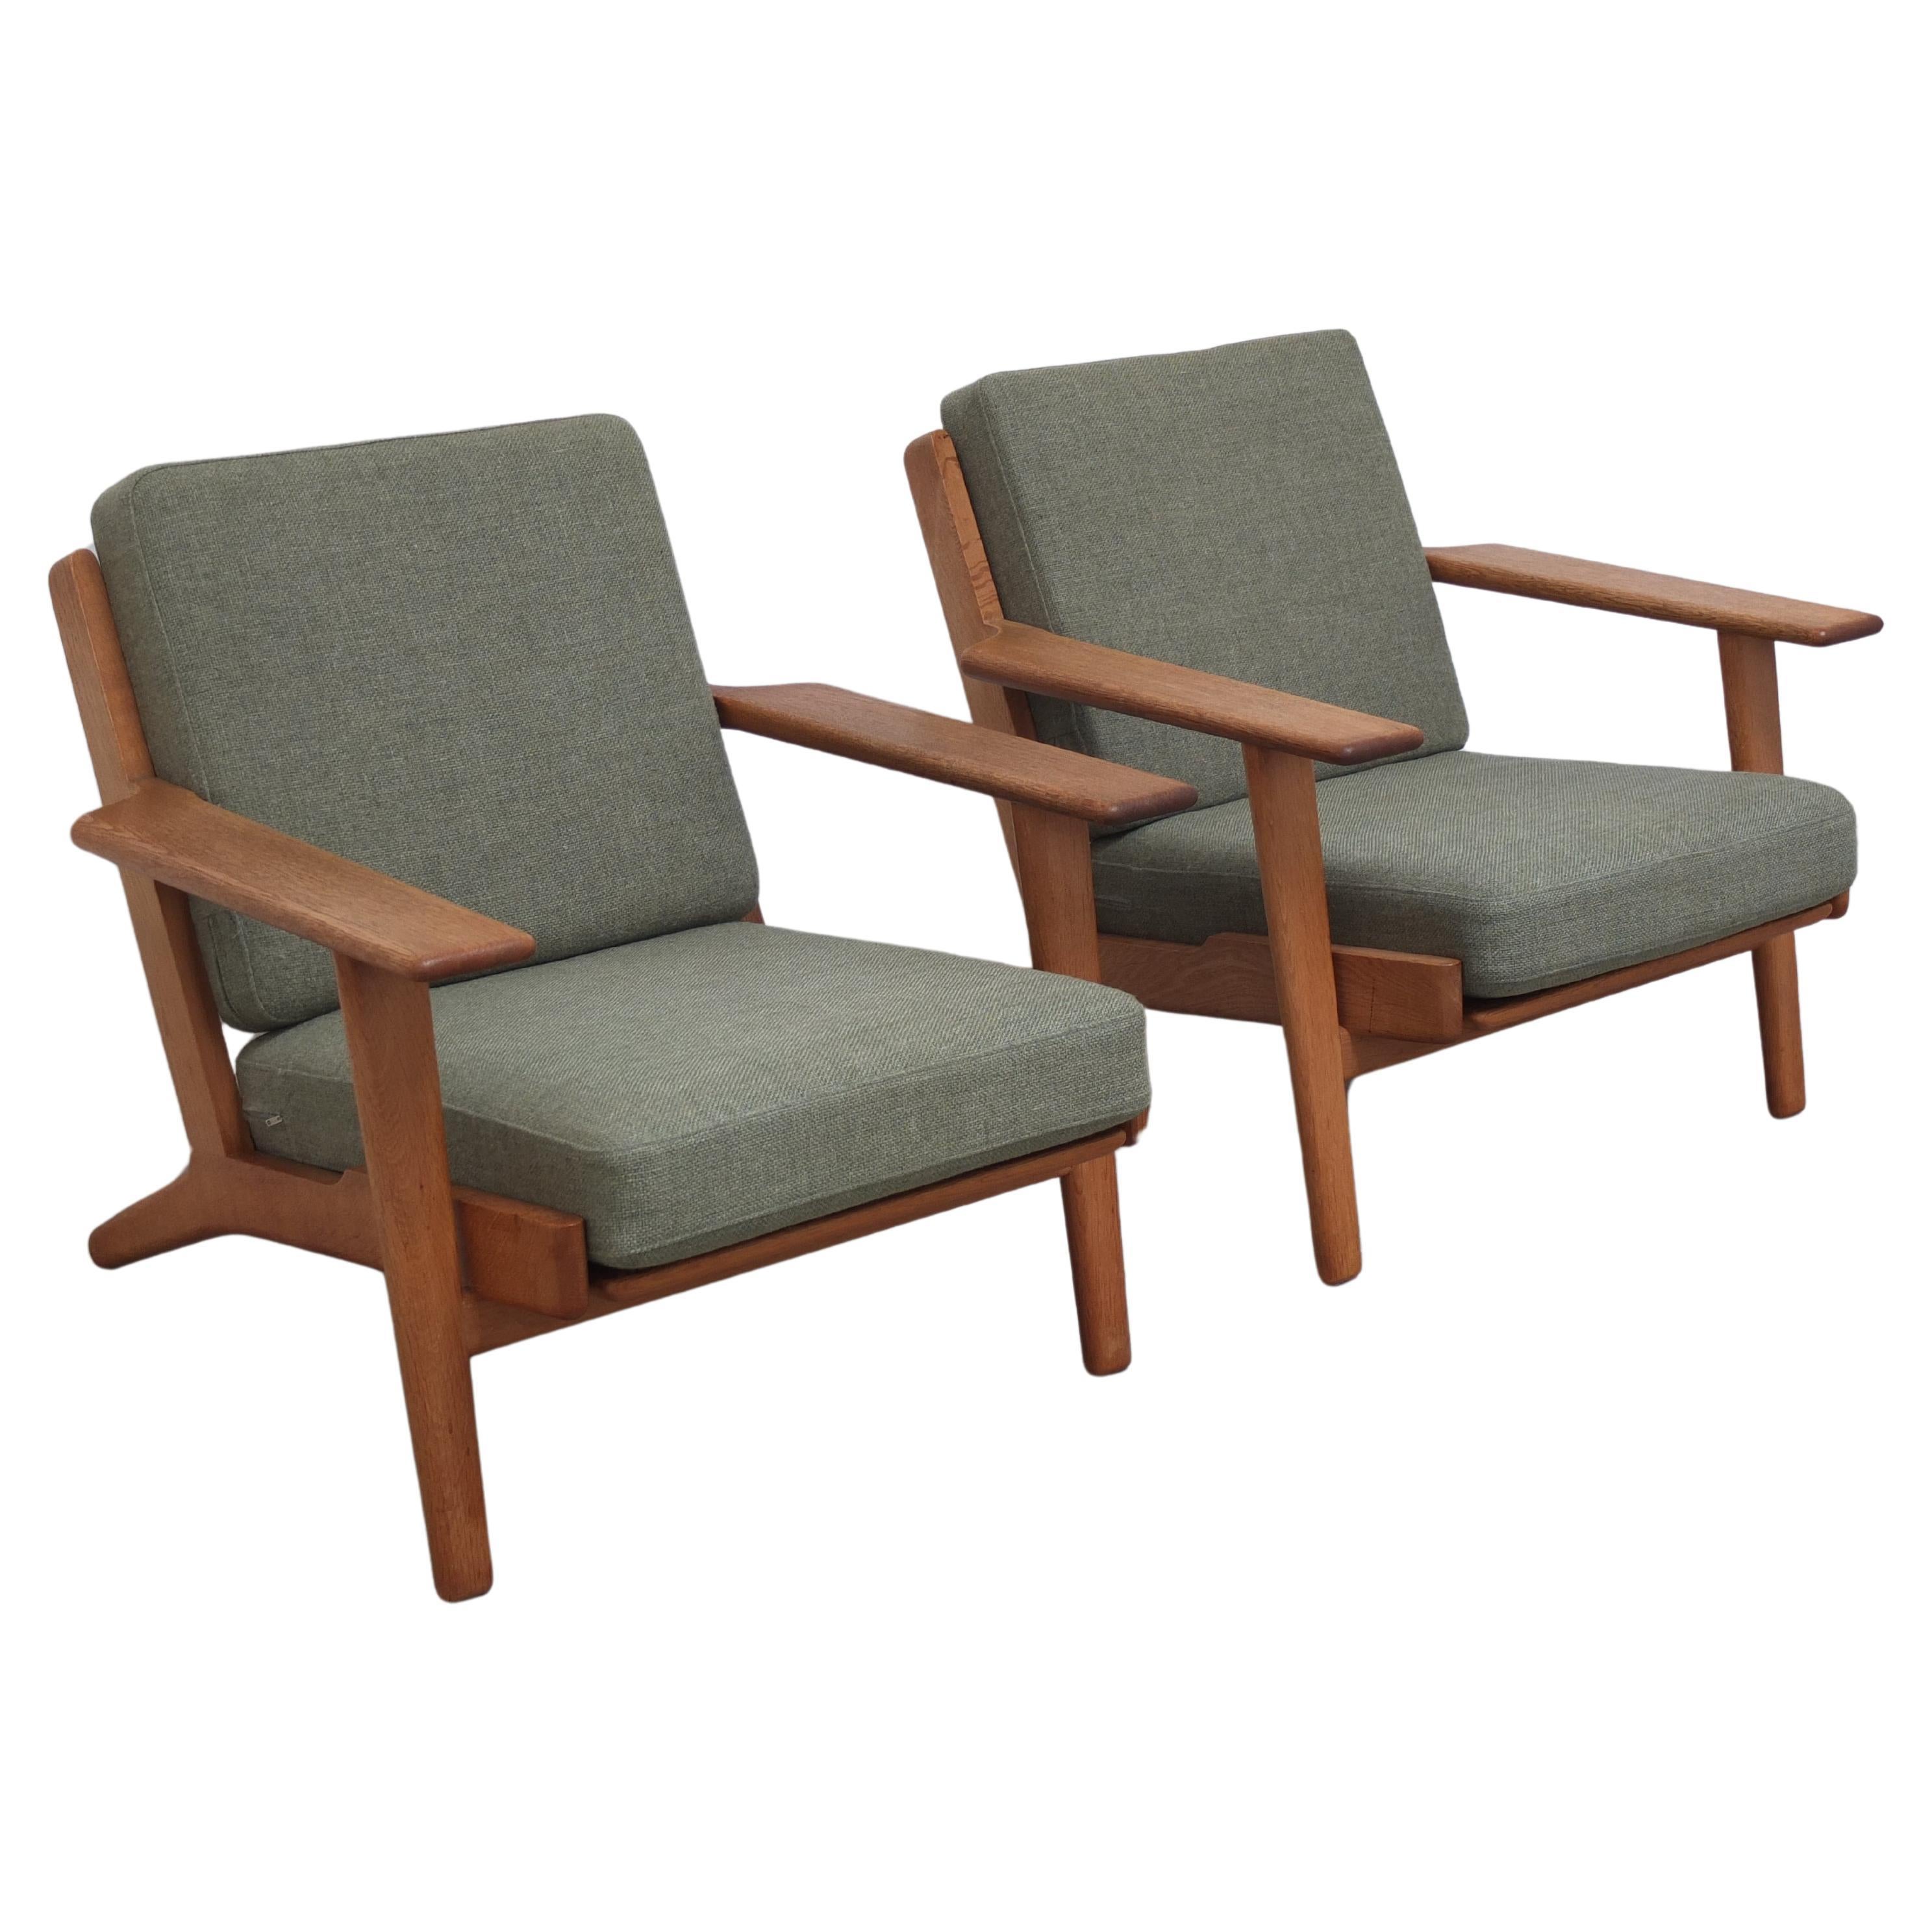 Early Pair of Oak 'GE-290' Lounge Chairs by Hans Wegner for Getama, 1953 For Sale